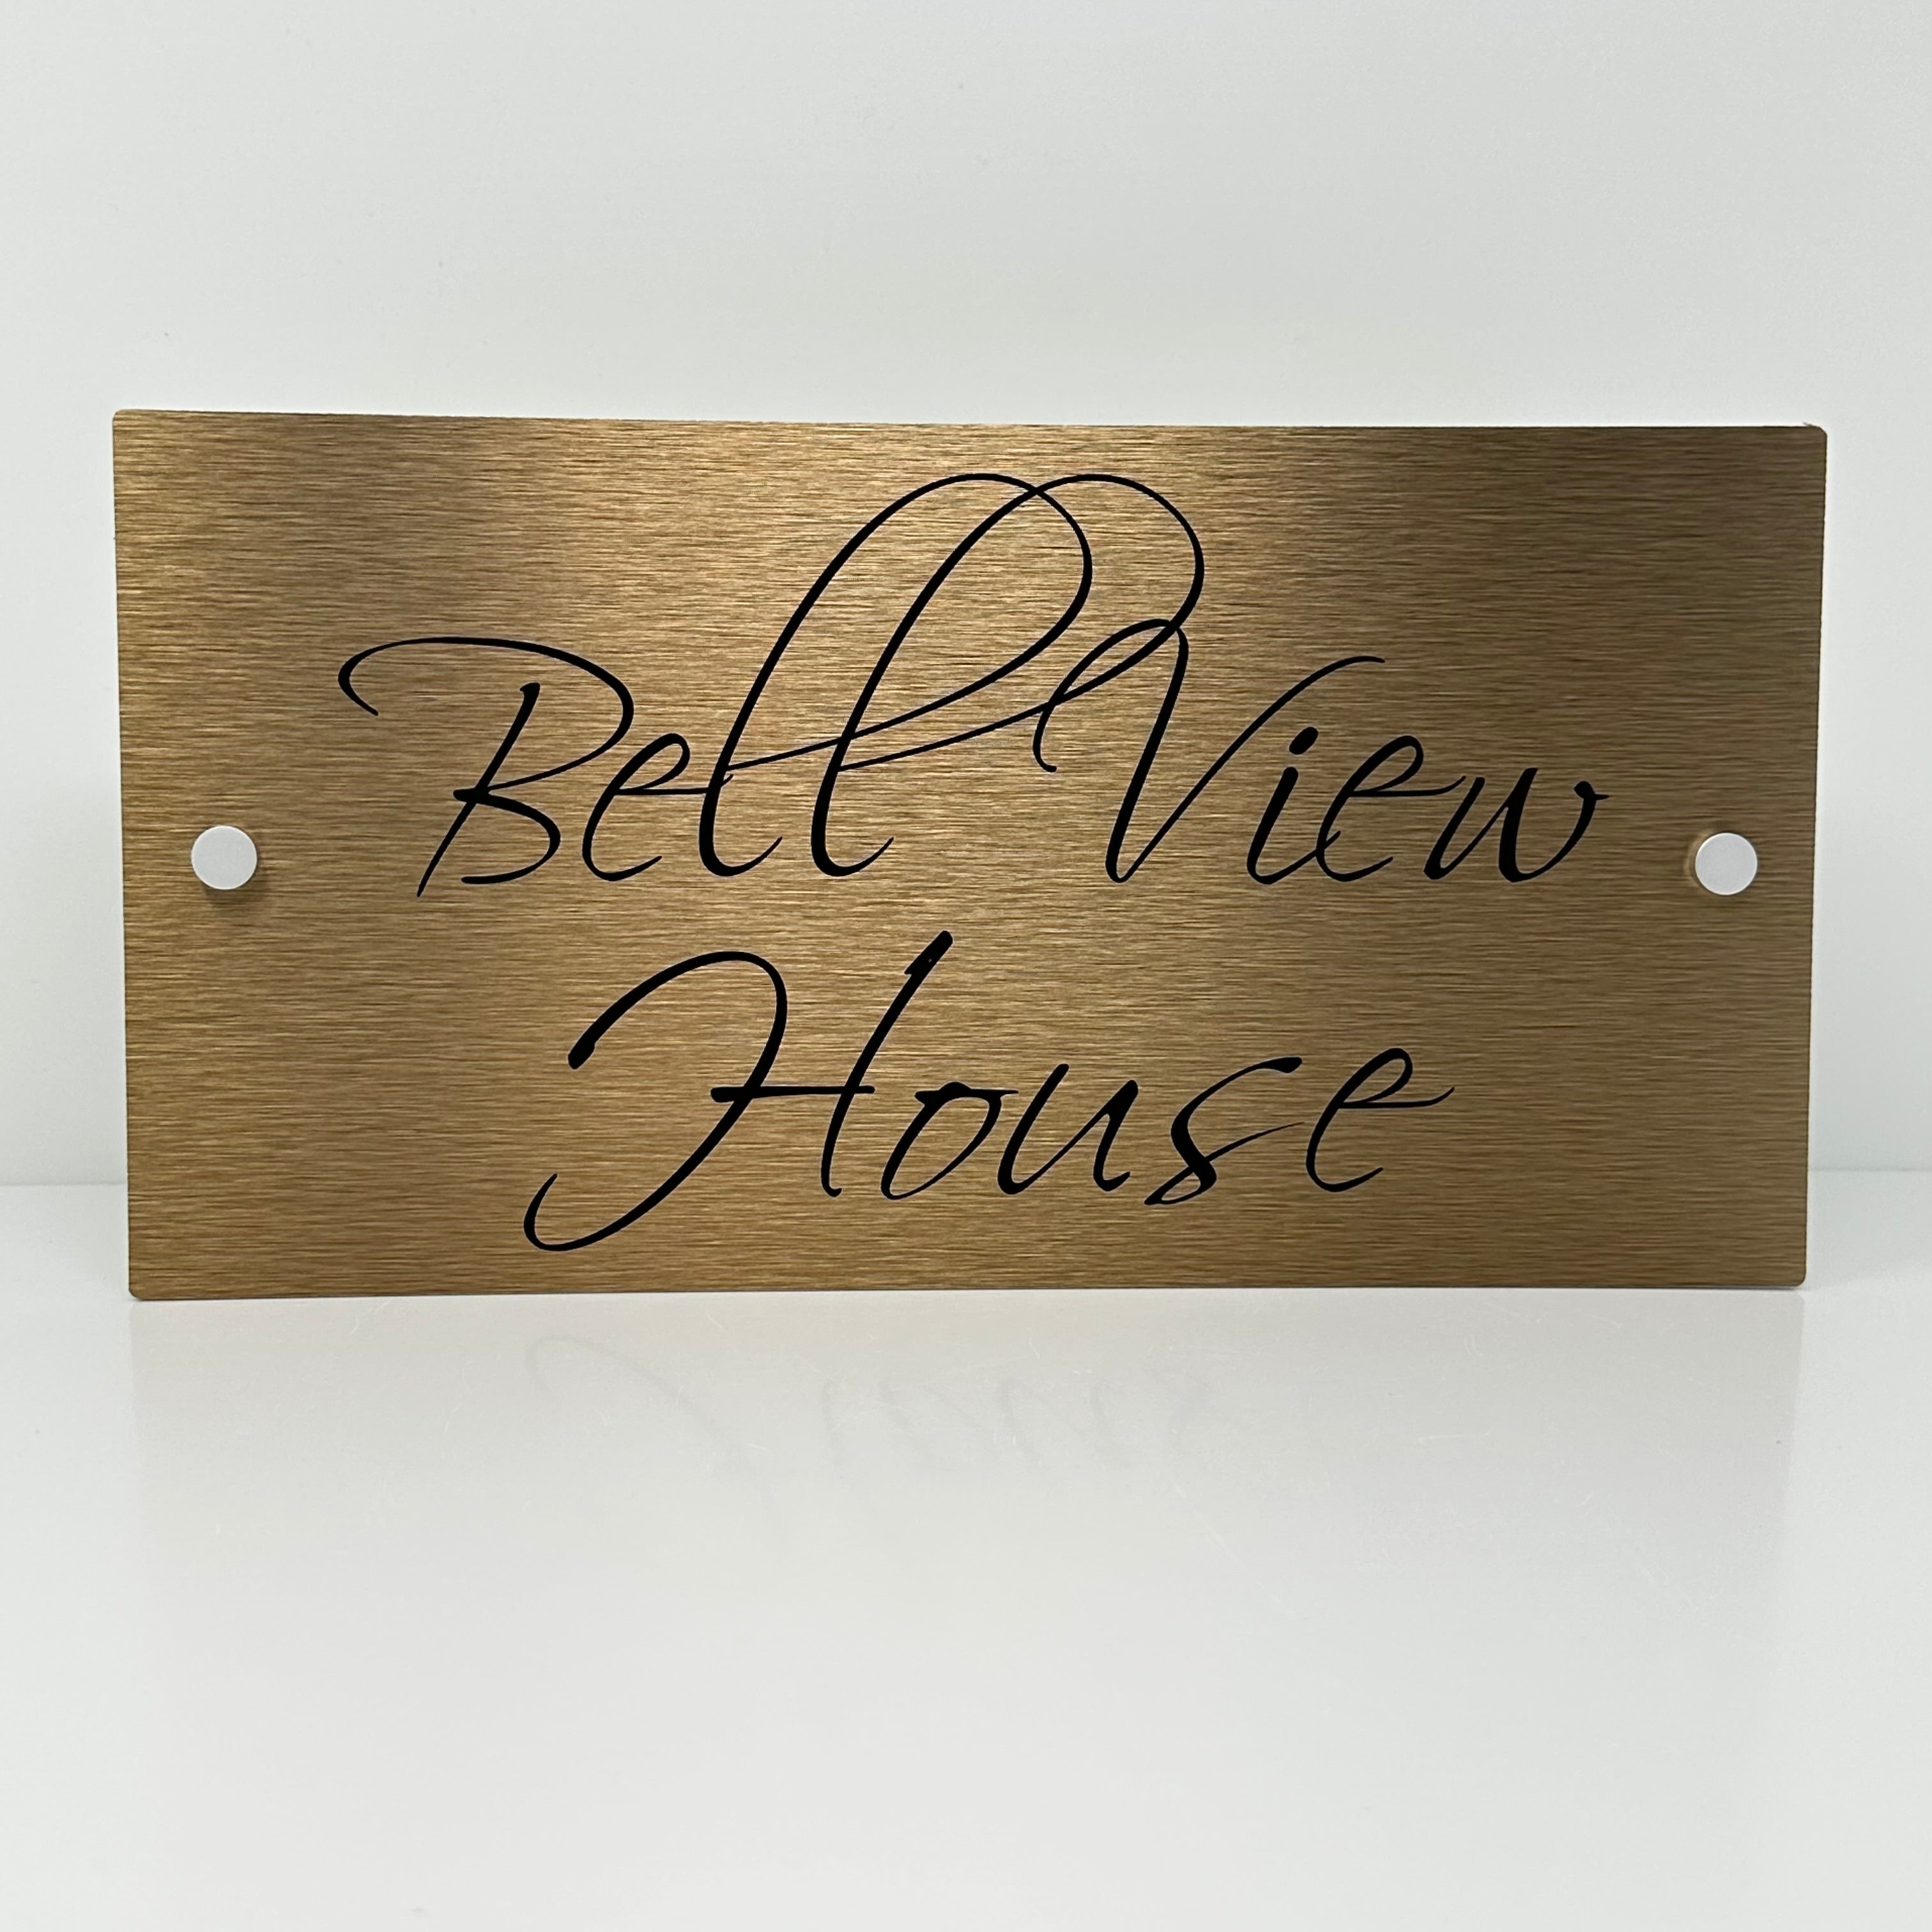 The Bell View Modern House Sign with a Brushed Brass Panel and Satin Silver Stand Off Fixings ( Size - 35cm x 18cm )